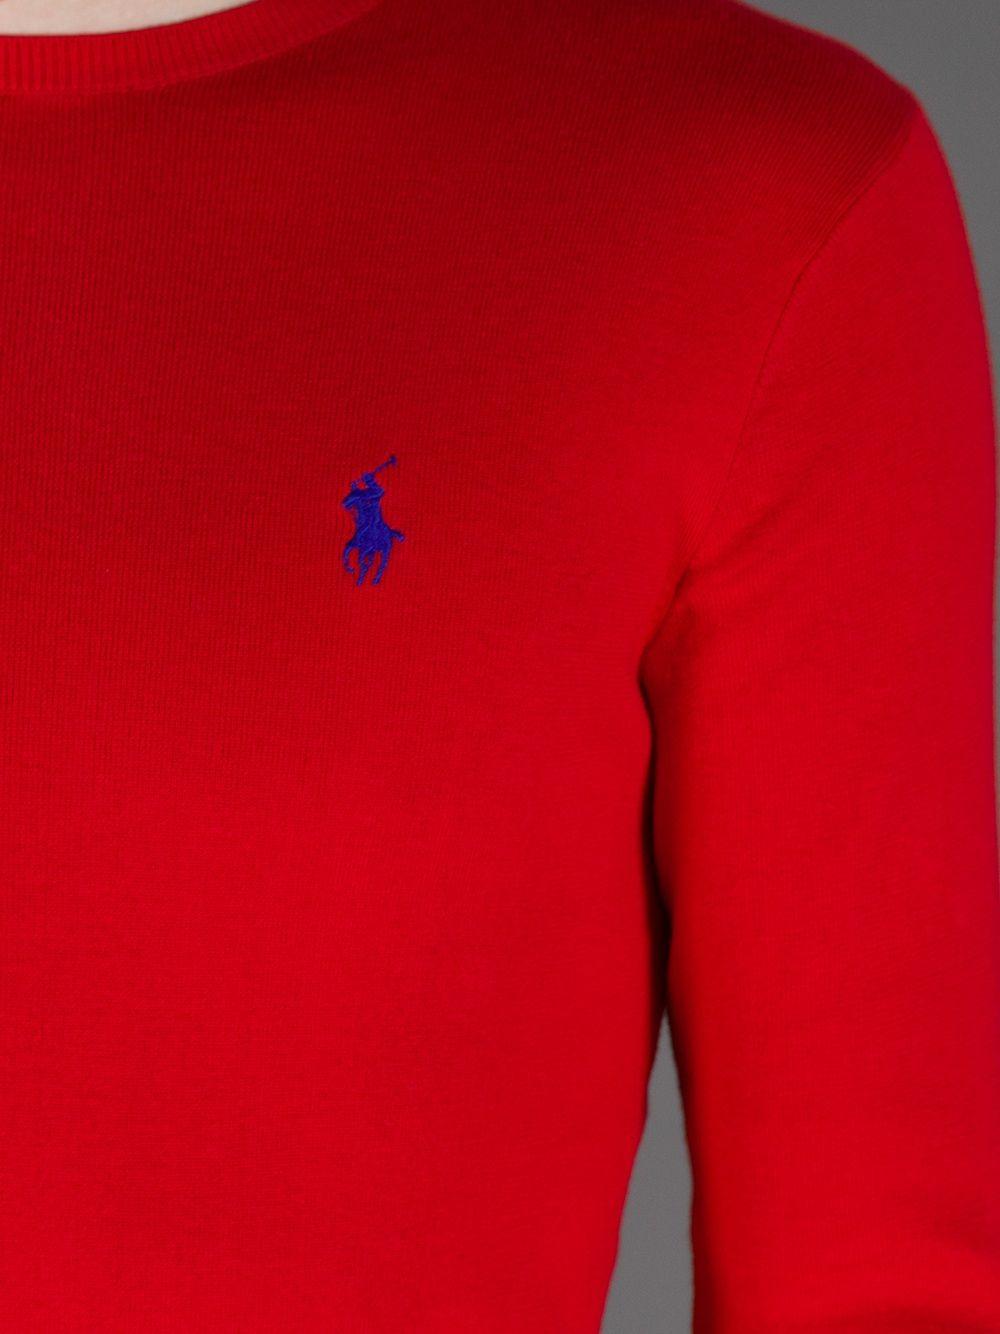 Blue with Red Polo Logo - Polo Ralph Lauren Crew Neck Sweater in Red for Men - Lyst